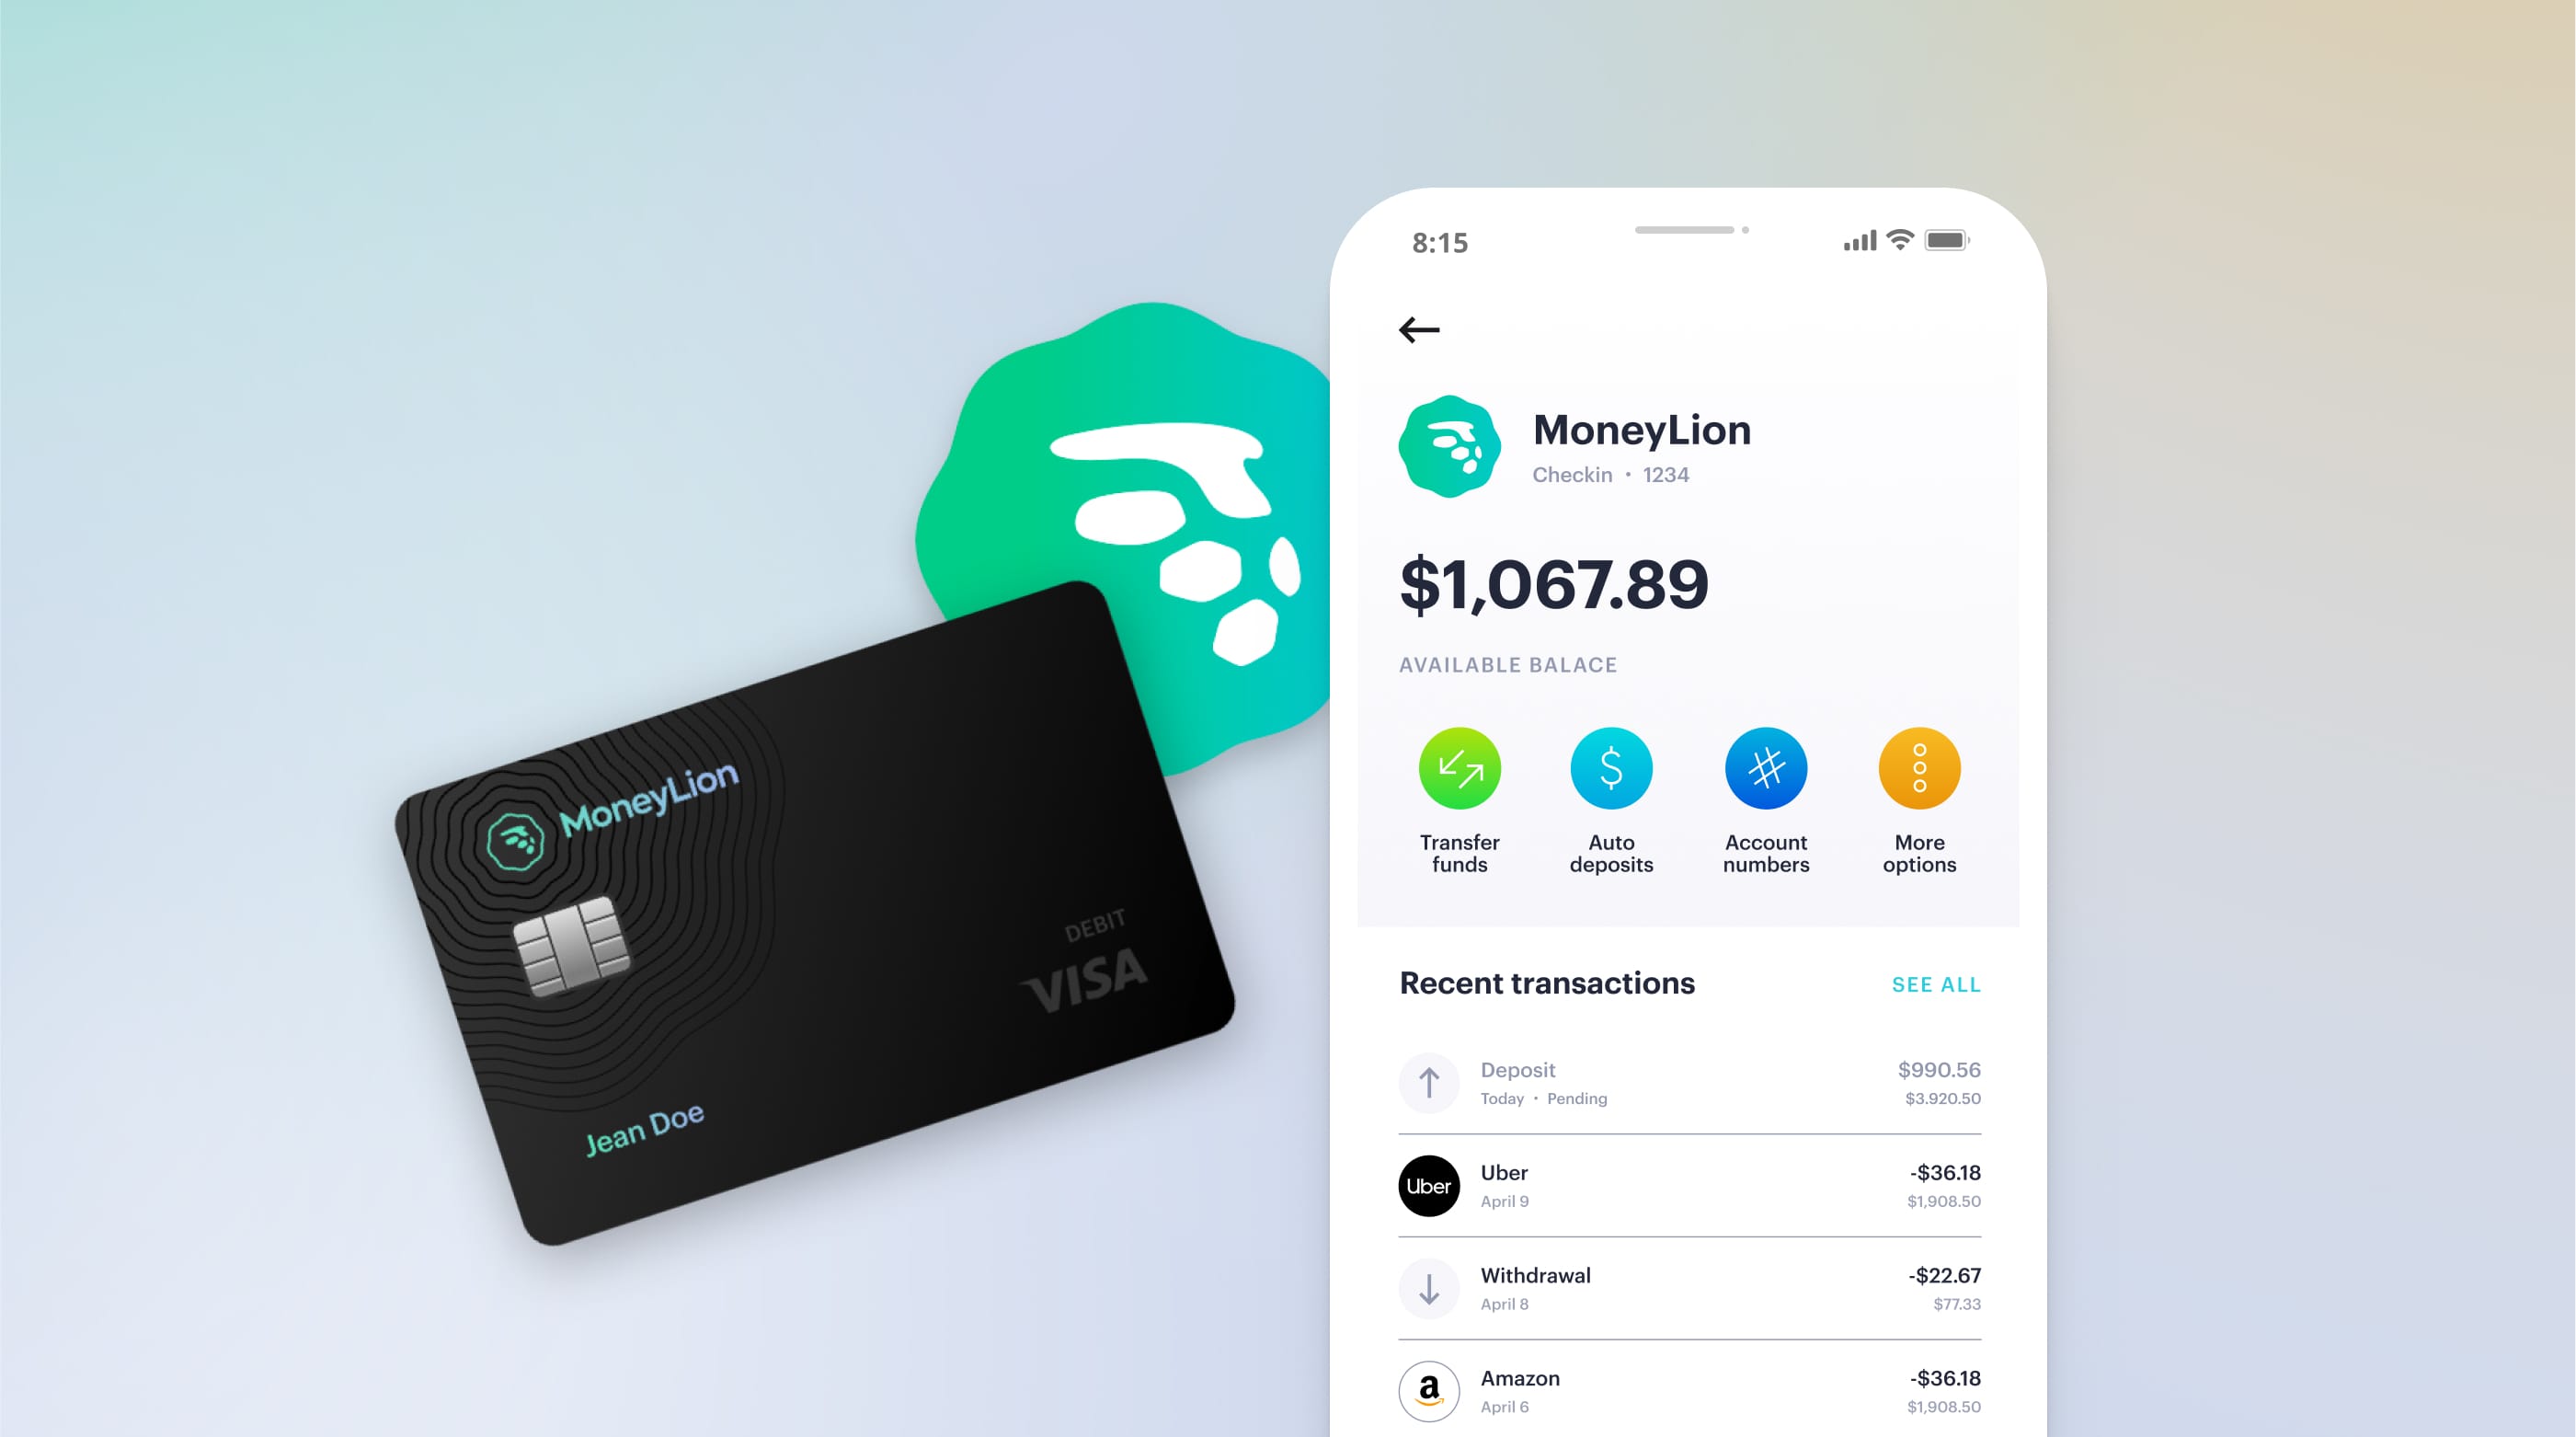 MoneyLion's mobile banking app interface with debit card